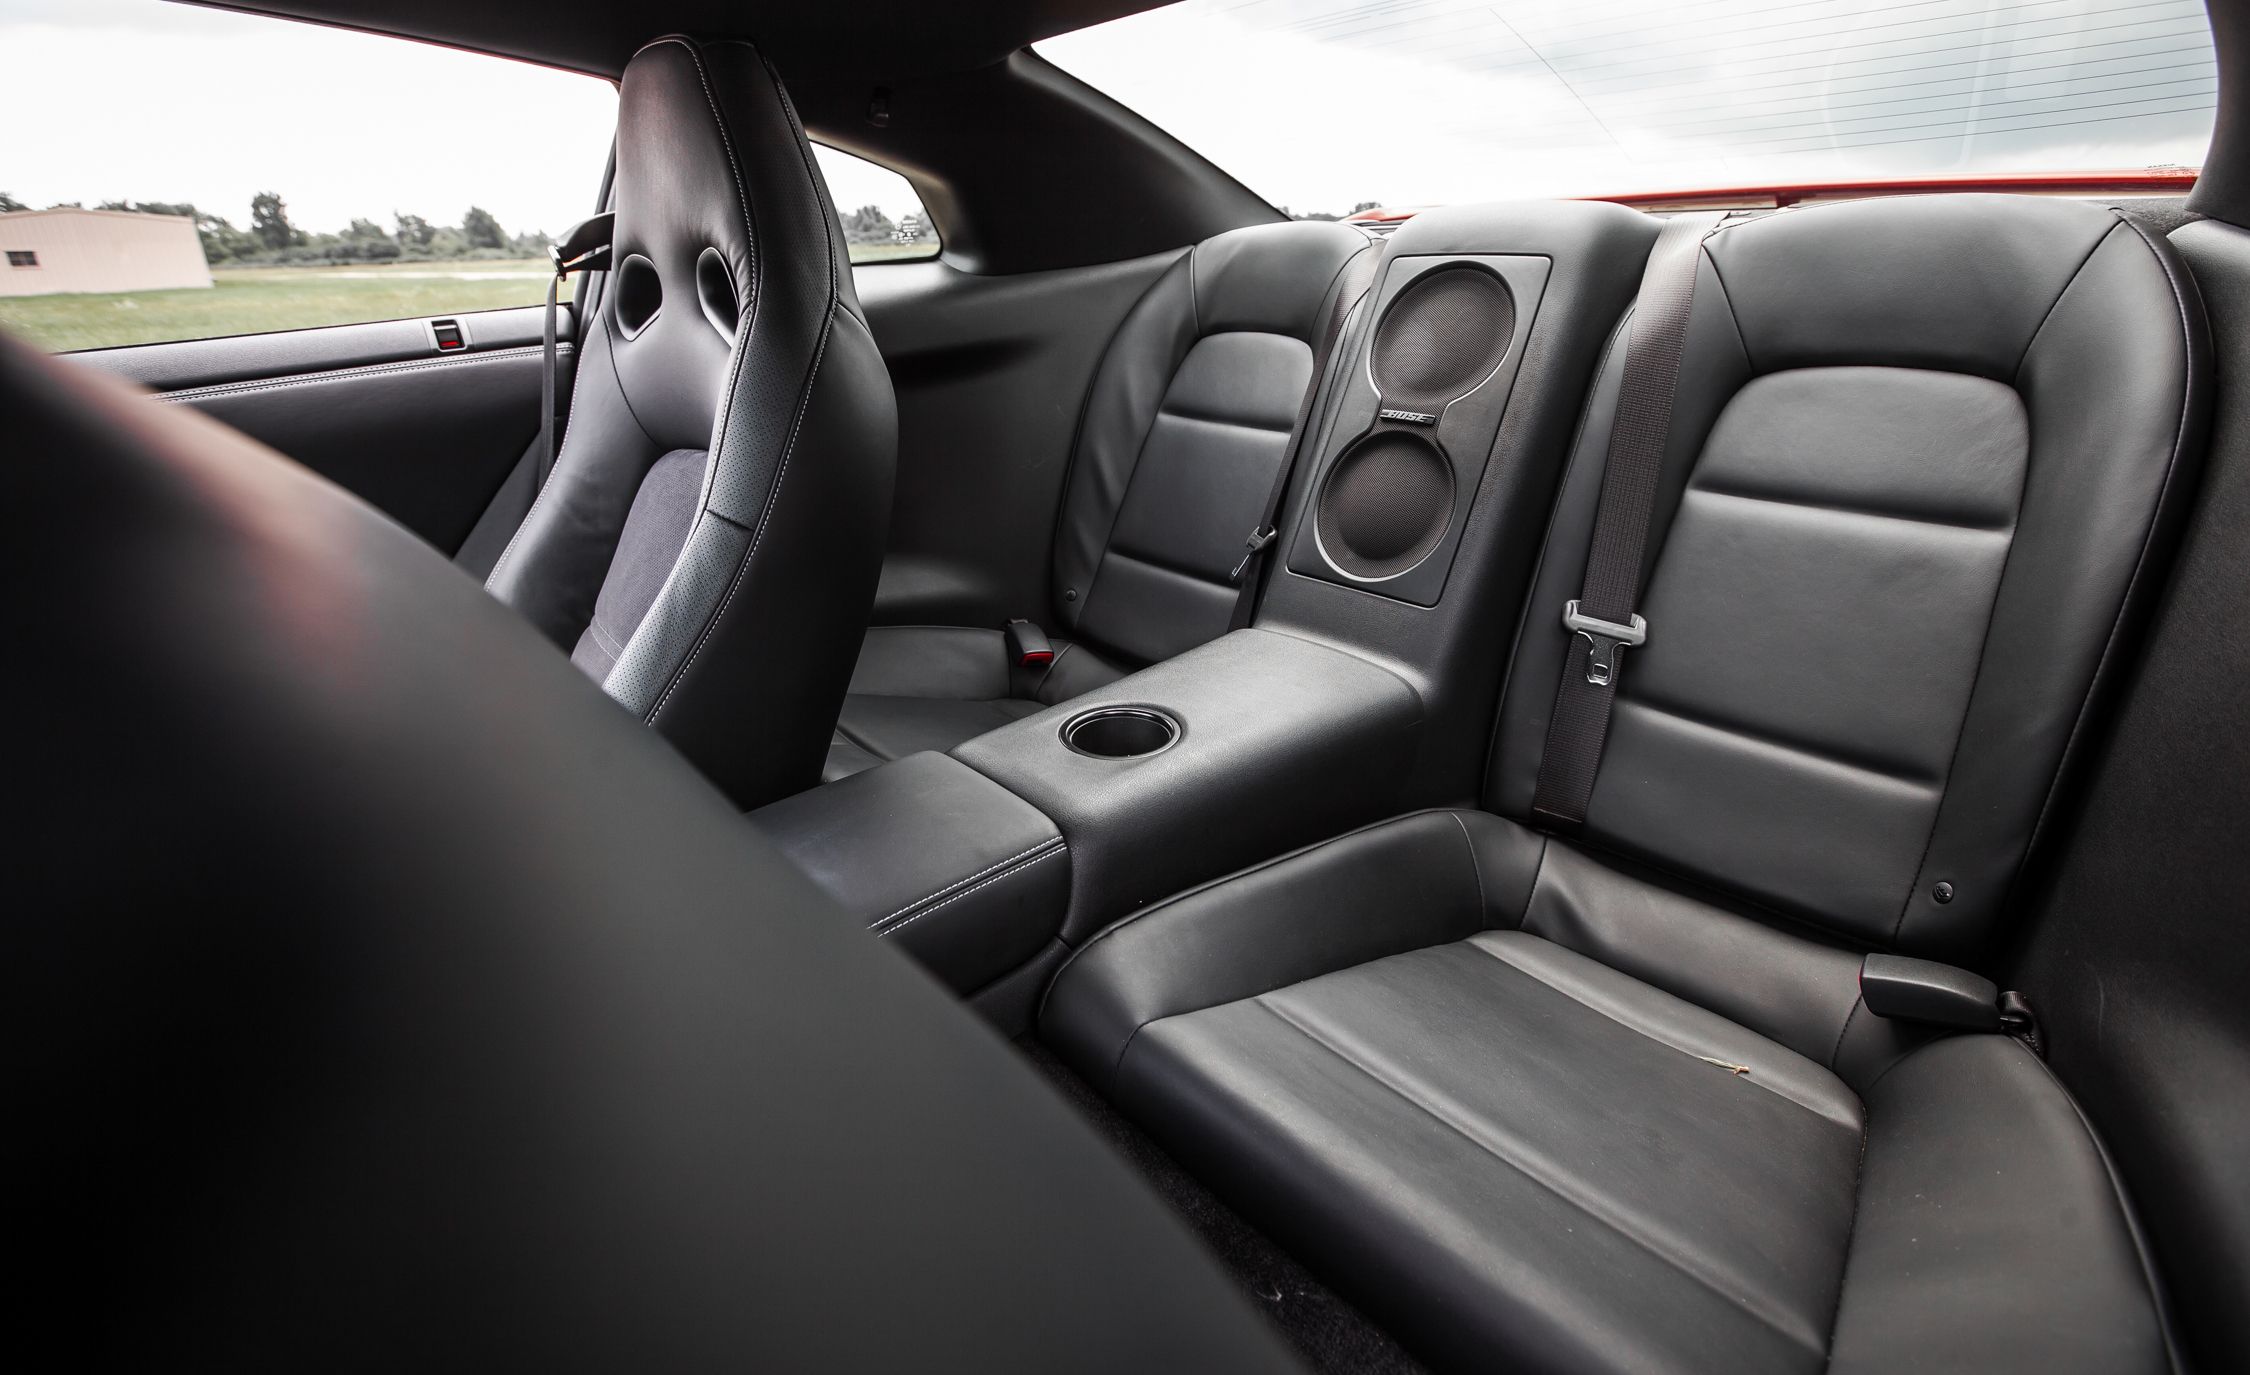 2015 Nissan Gt R Interior (View 14 of 25)